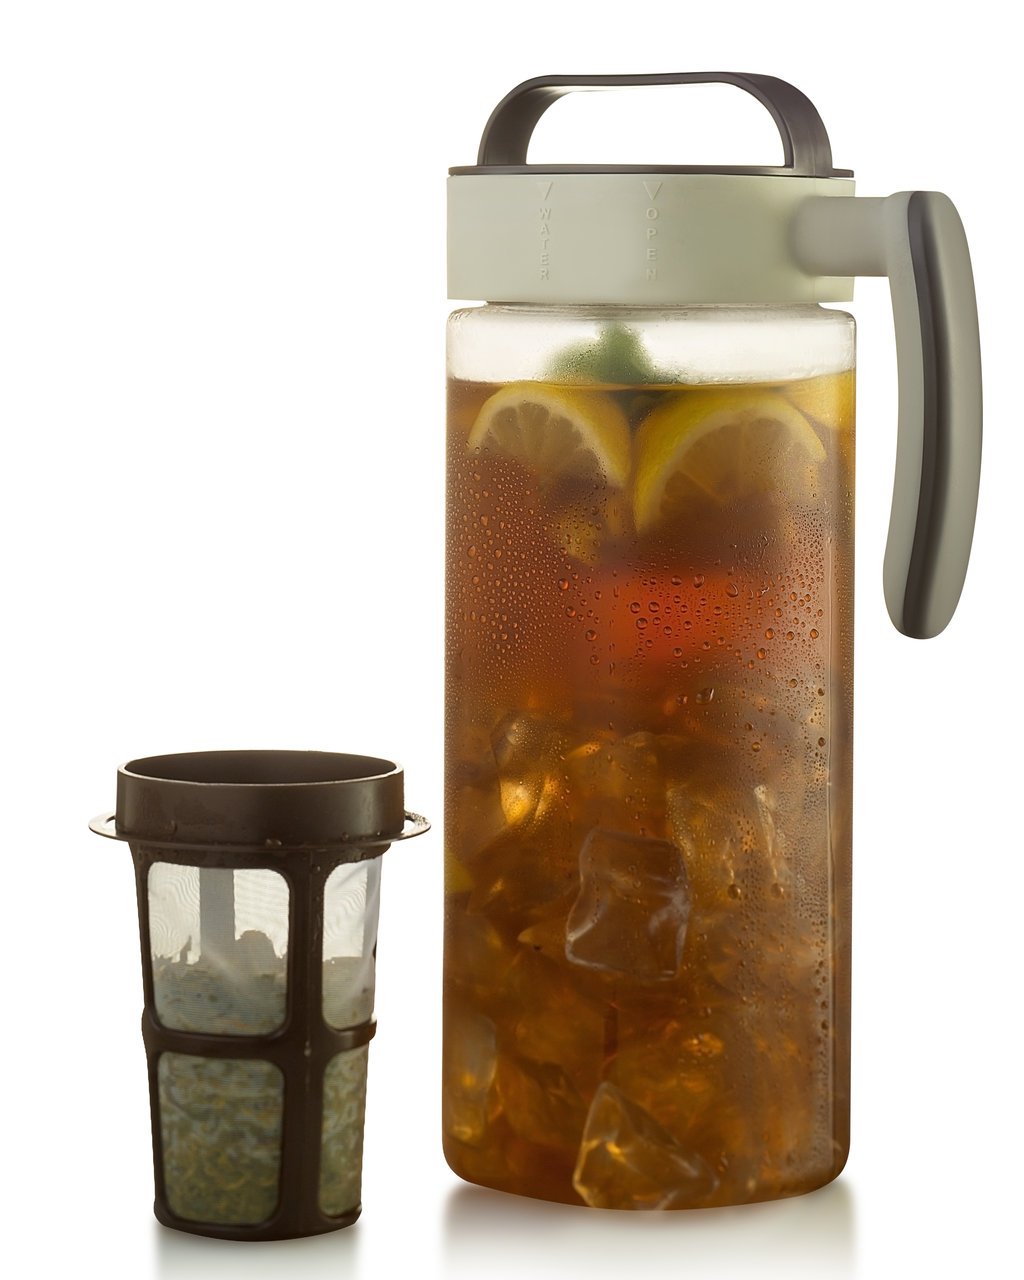 Komax Large Ice Tea Maker Pitcher – Tritan Iced Tea Pitcher w/Airtight Lid – Temperature Resistant Herbal Infuser Hot Tea Maker – BPA Free, Dishwasher & Microwave Safe Pitcher with Spout (2.1 Quart)